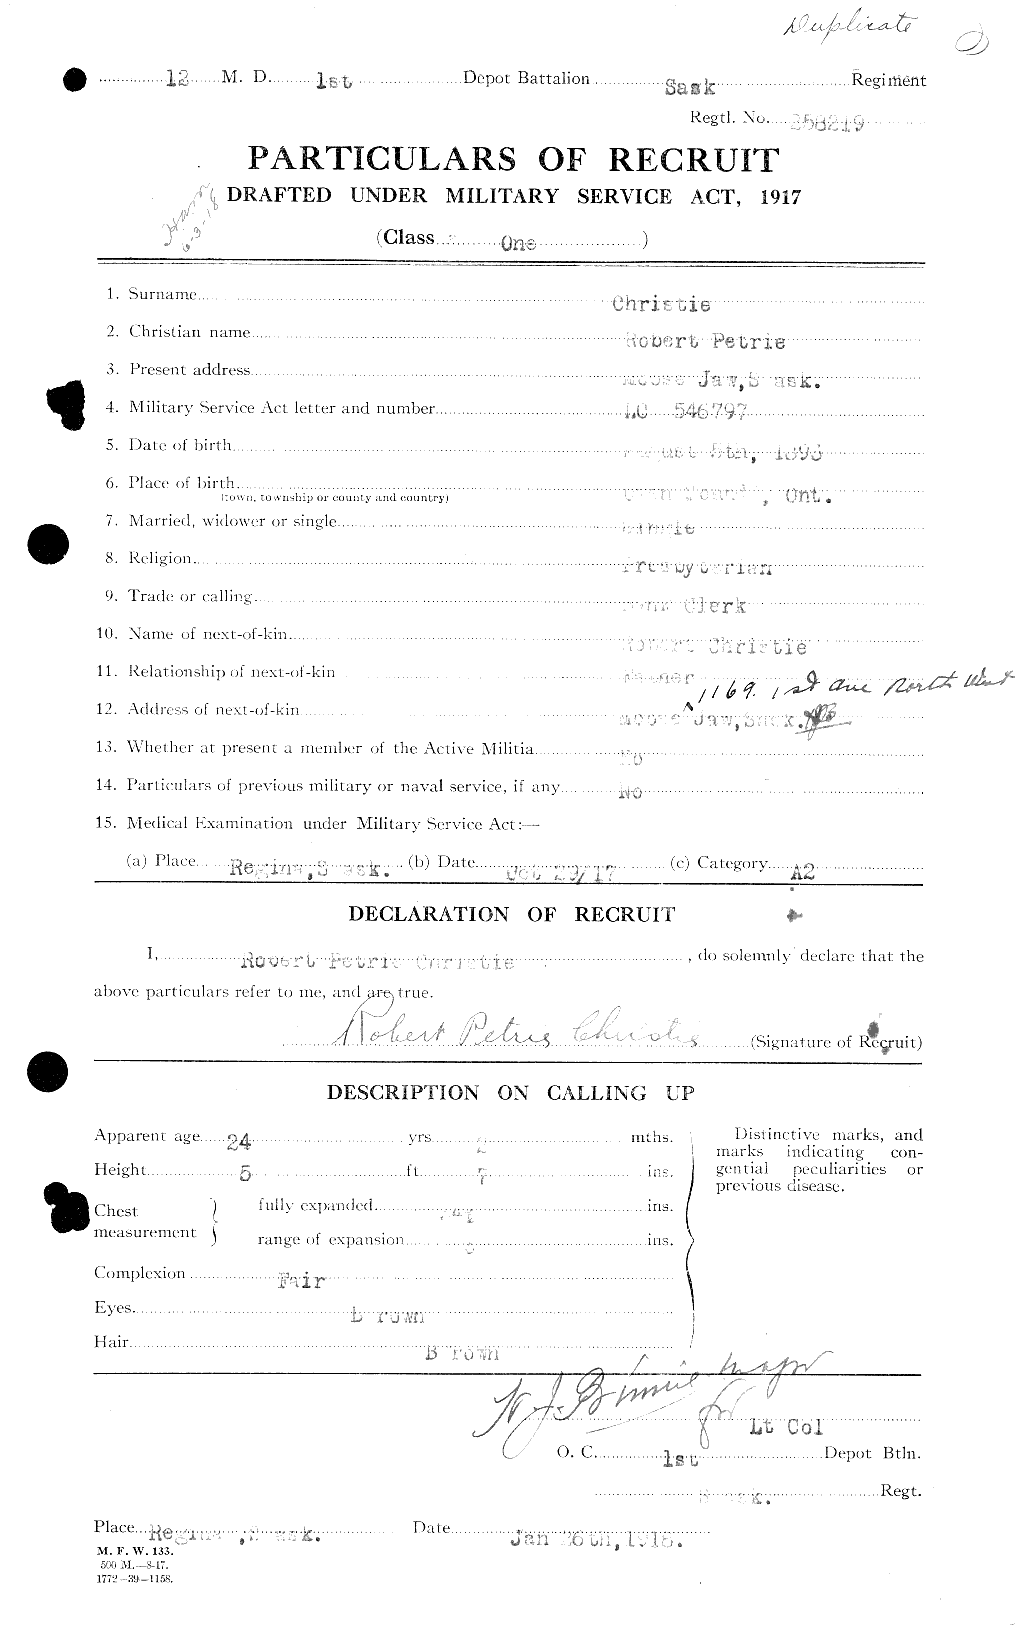 Personnel Records of the First World War - CEF 022057a